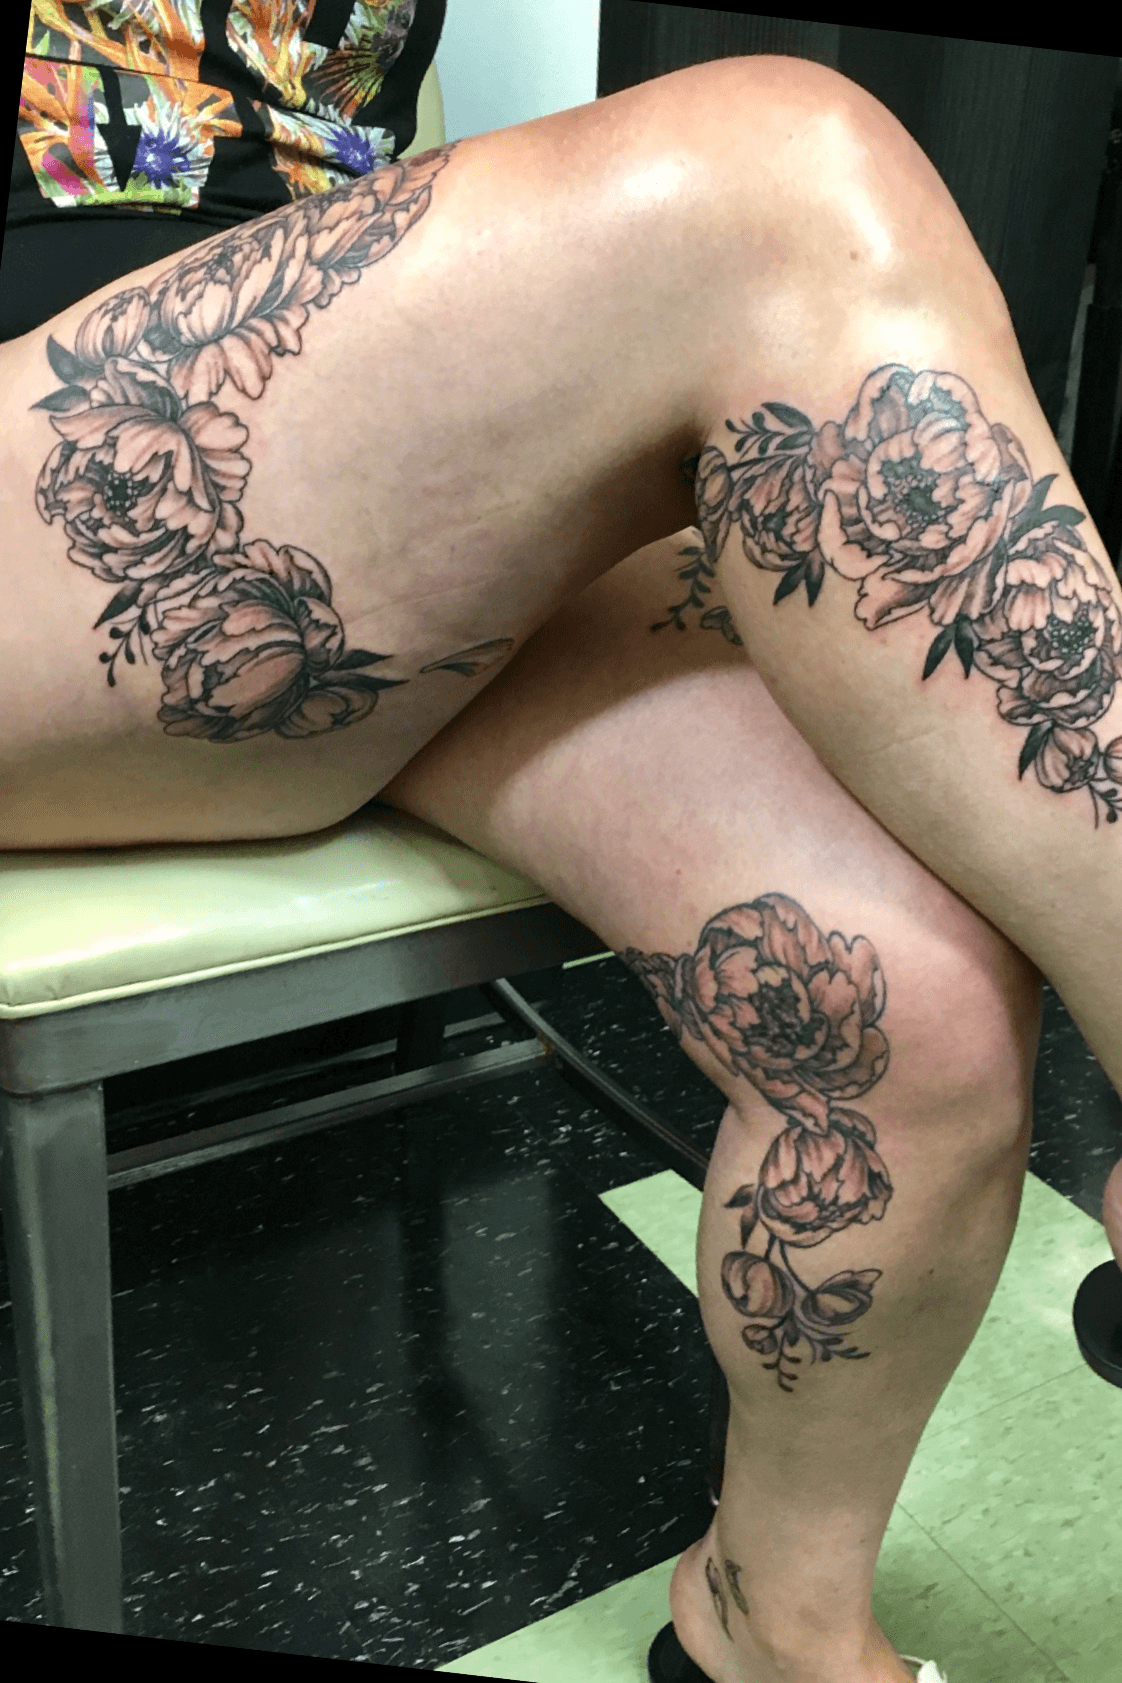 Varicose Veins Cover Up  pm  Nocturnal Tattoo Studio  Facebook